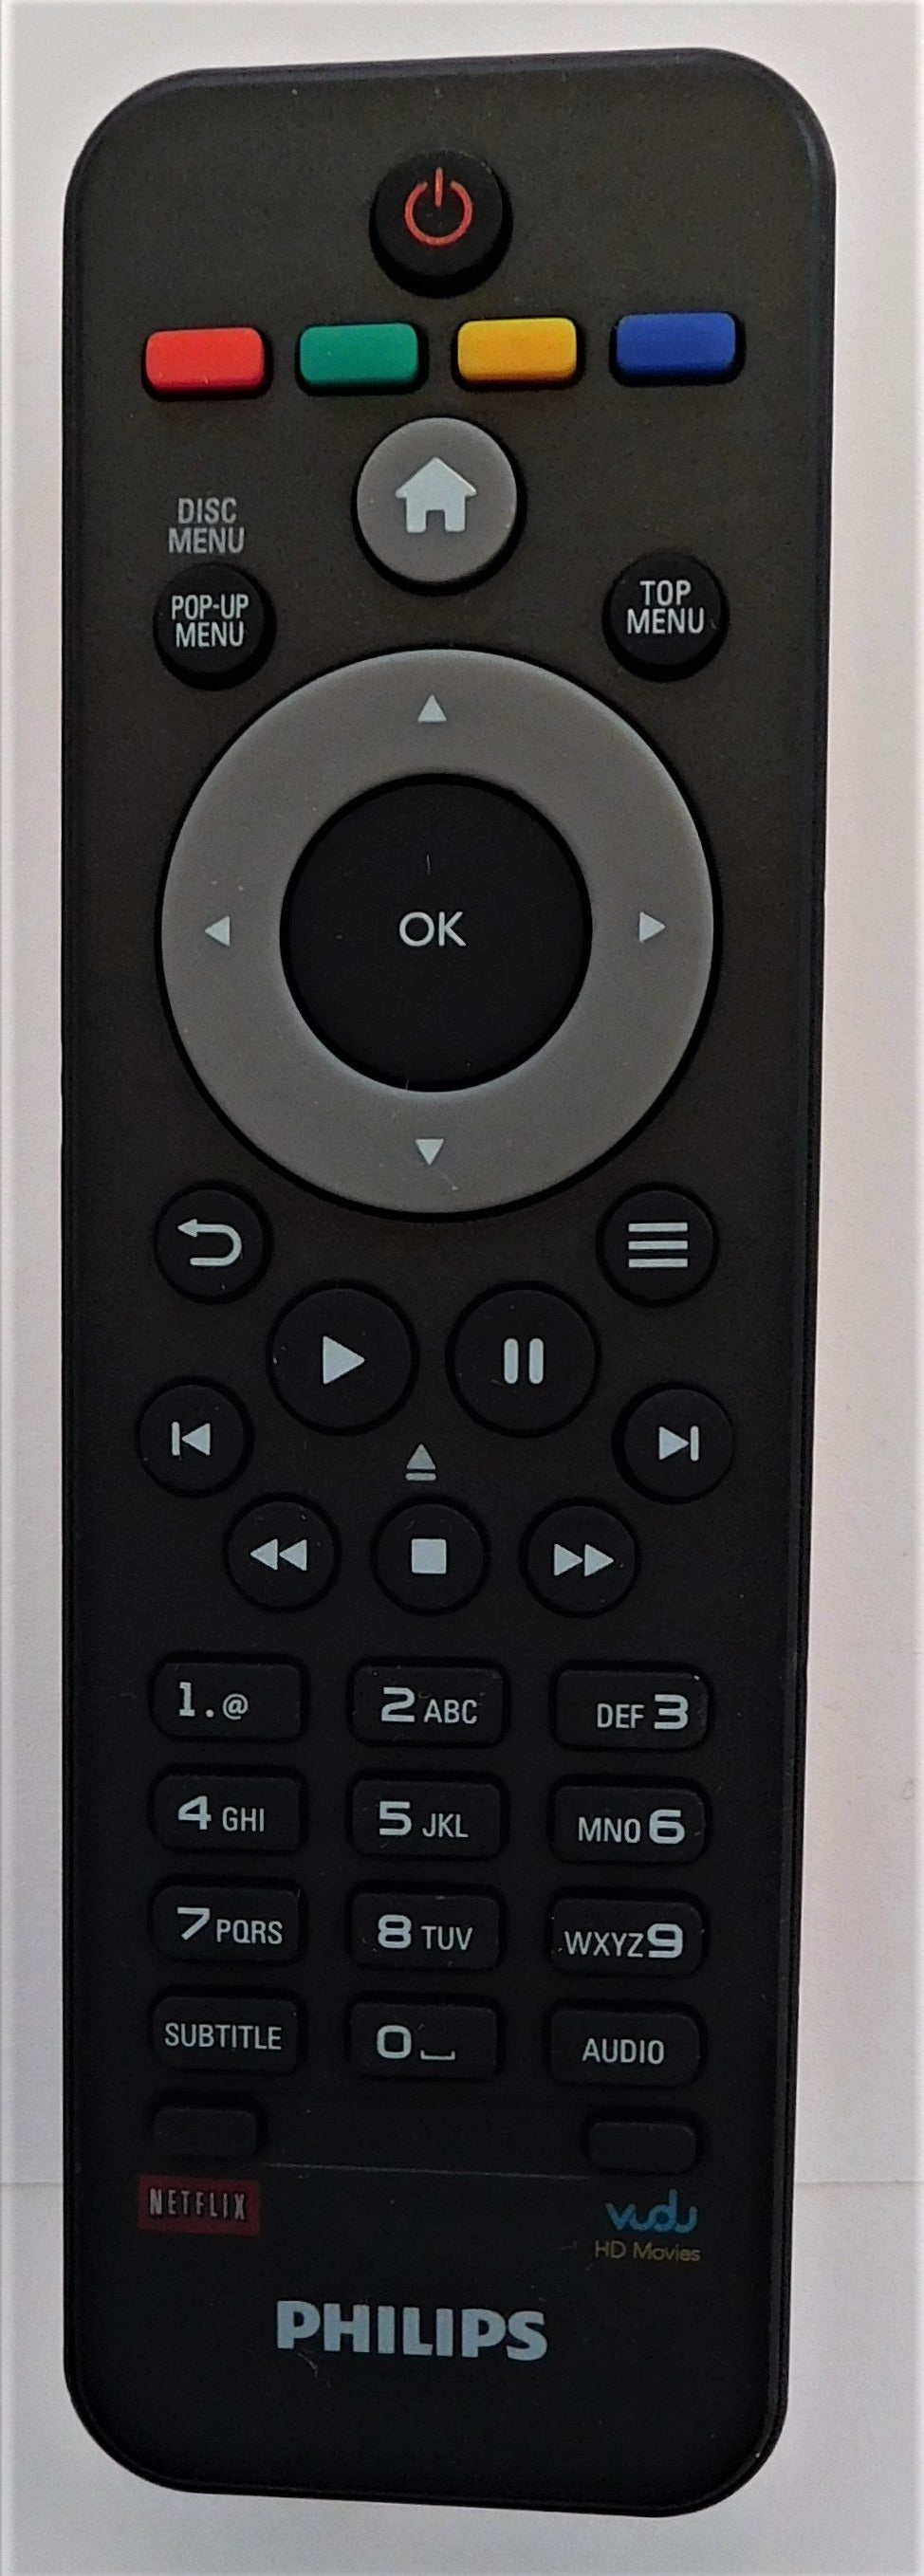 Original OEM replacement remote control for Philips Blu-ray players 996510058437